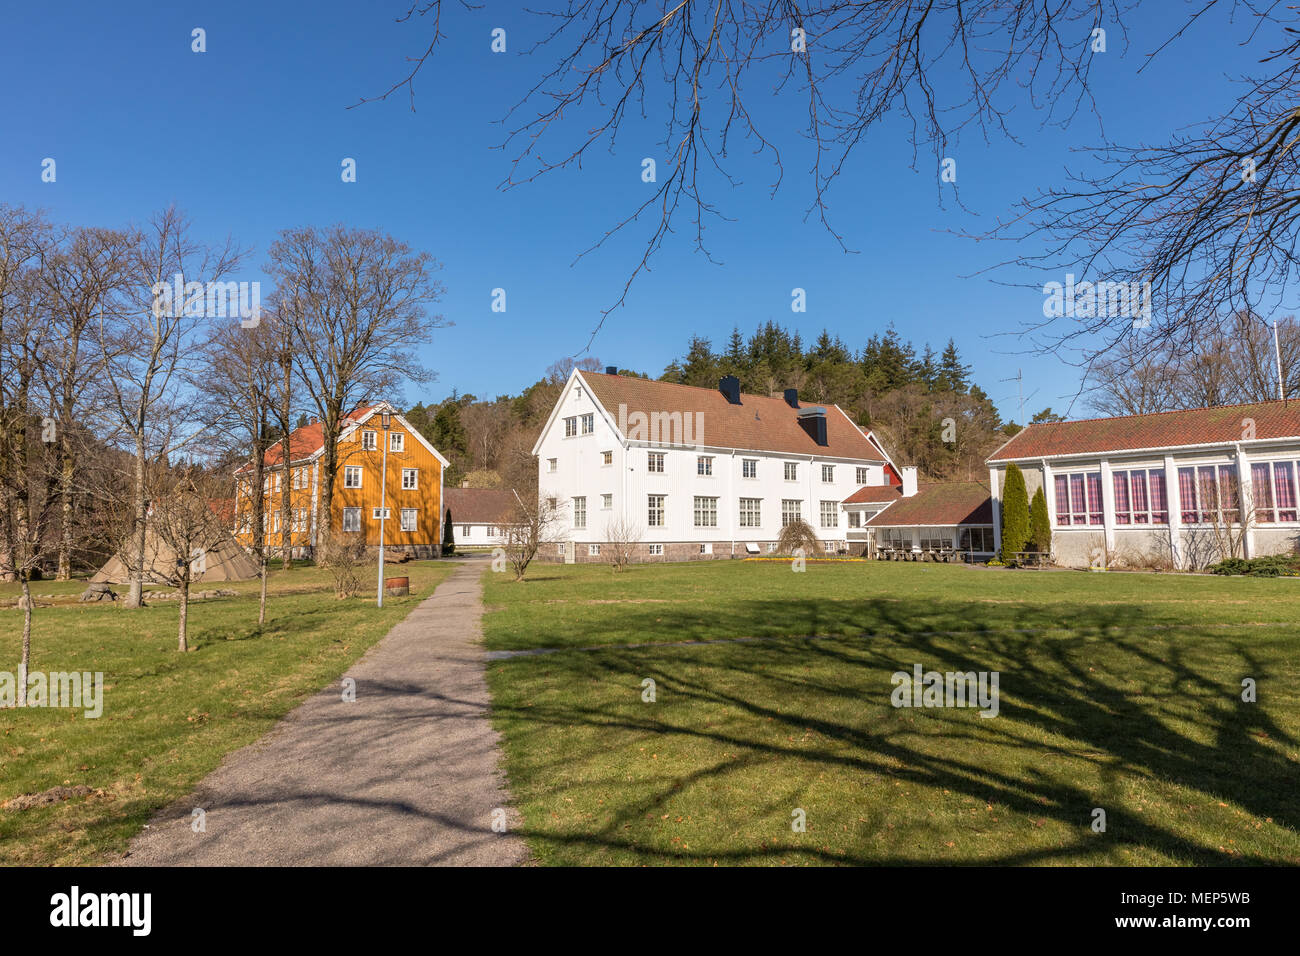 Sogne, Norway - April 21, 2018: Sogne Gamle Prestegard, or Old Sogne Rectory. Vicarage with wooden buildings, Vest-Agder in Norway. Blue sky, green grass. Stock Photo